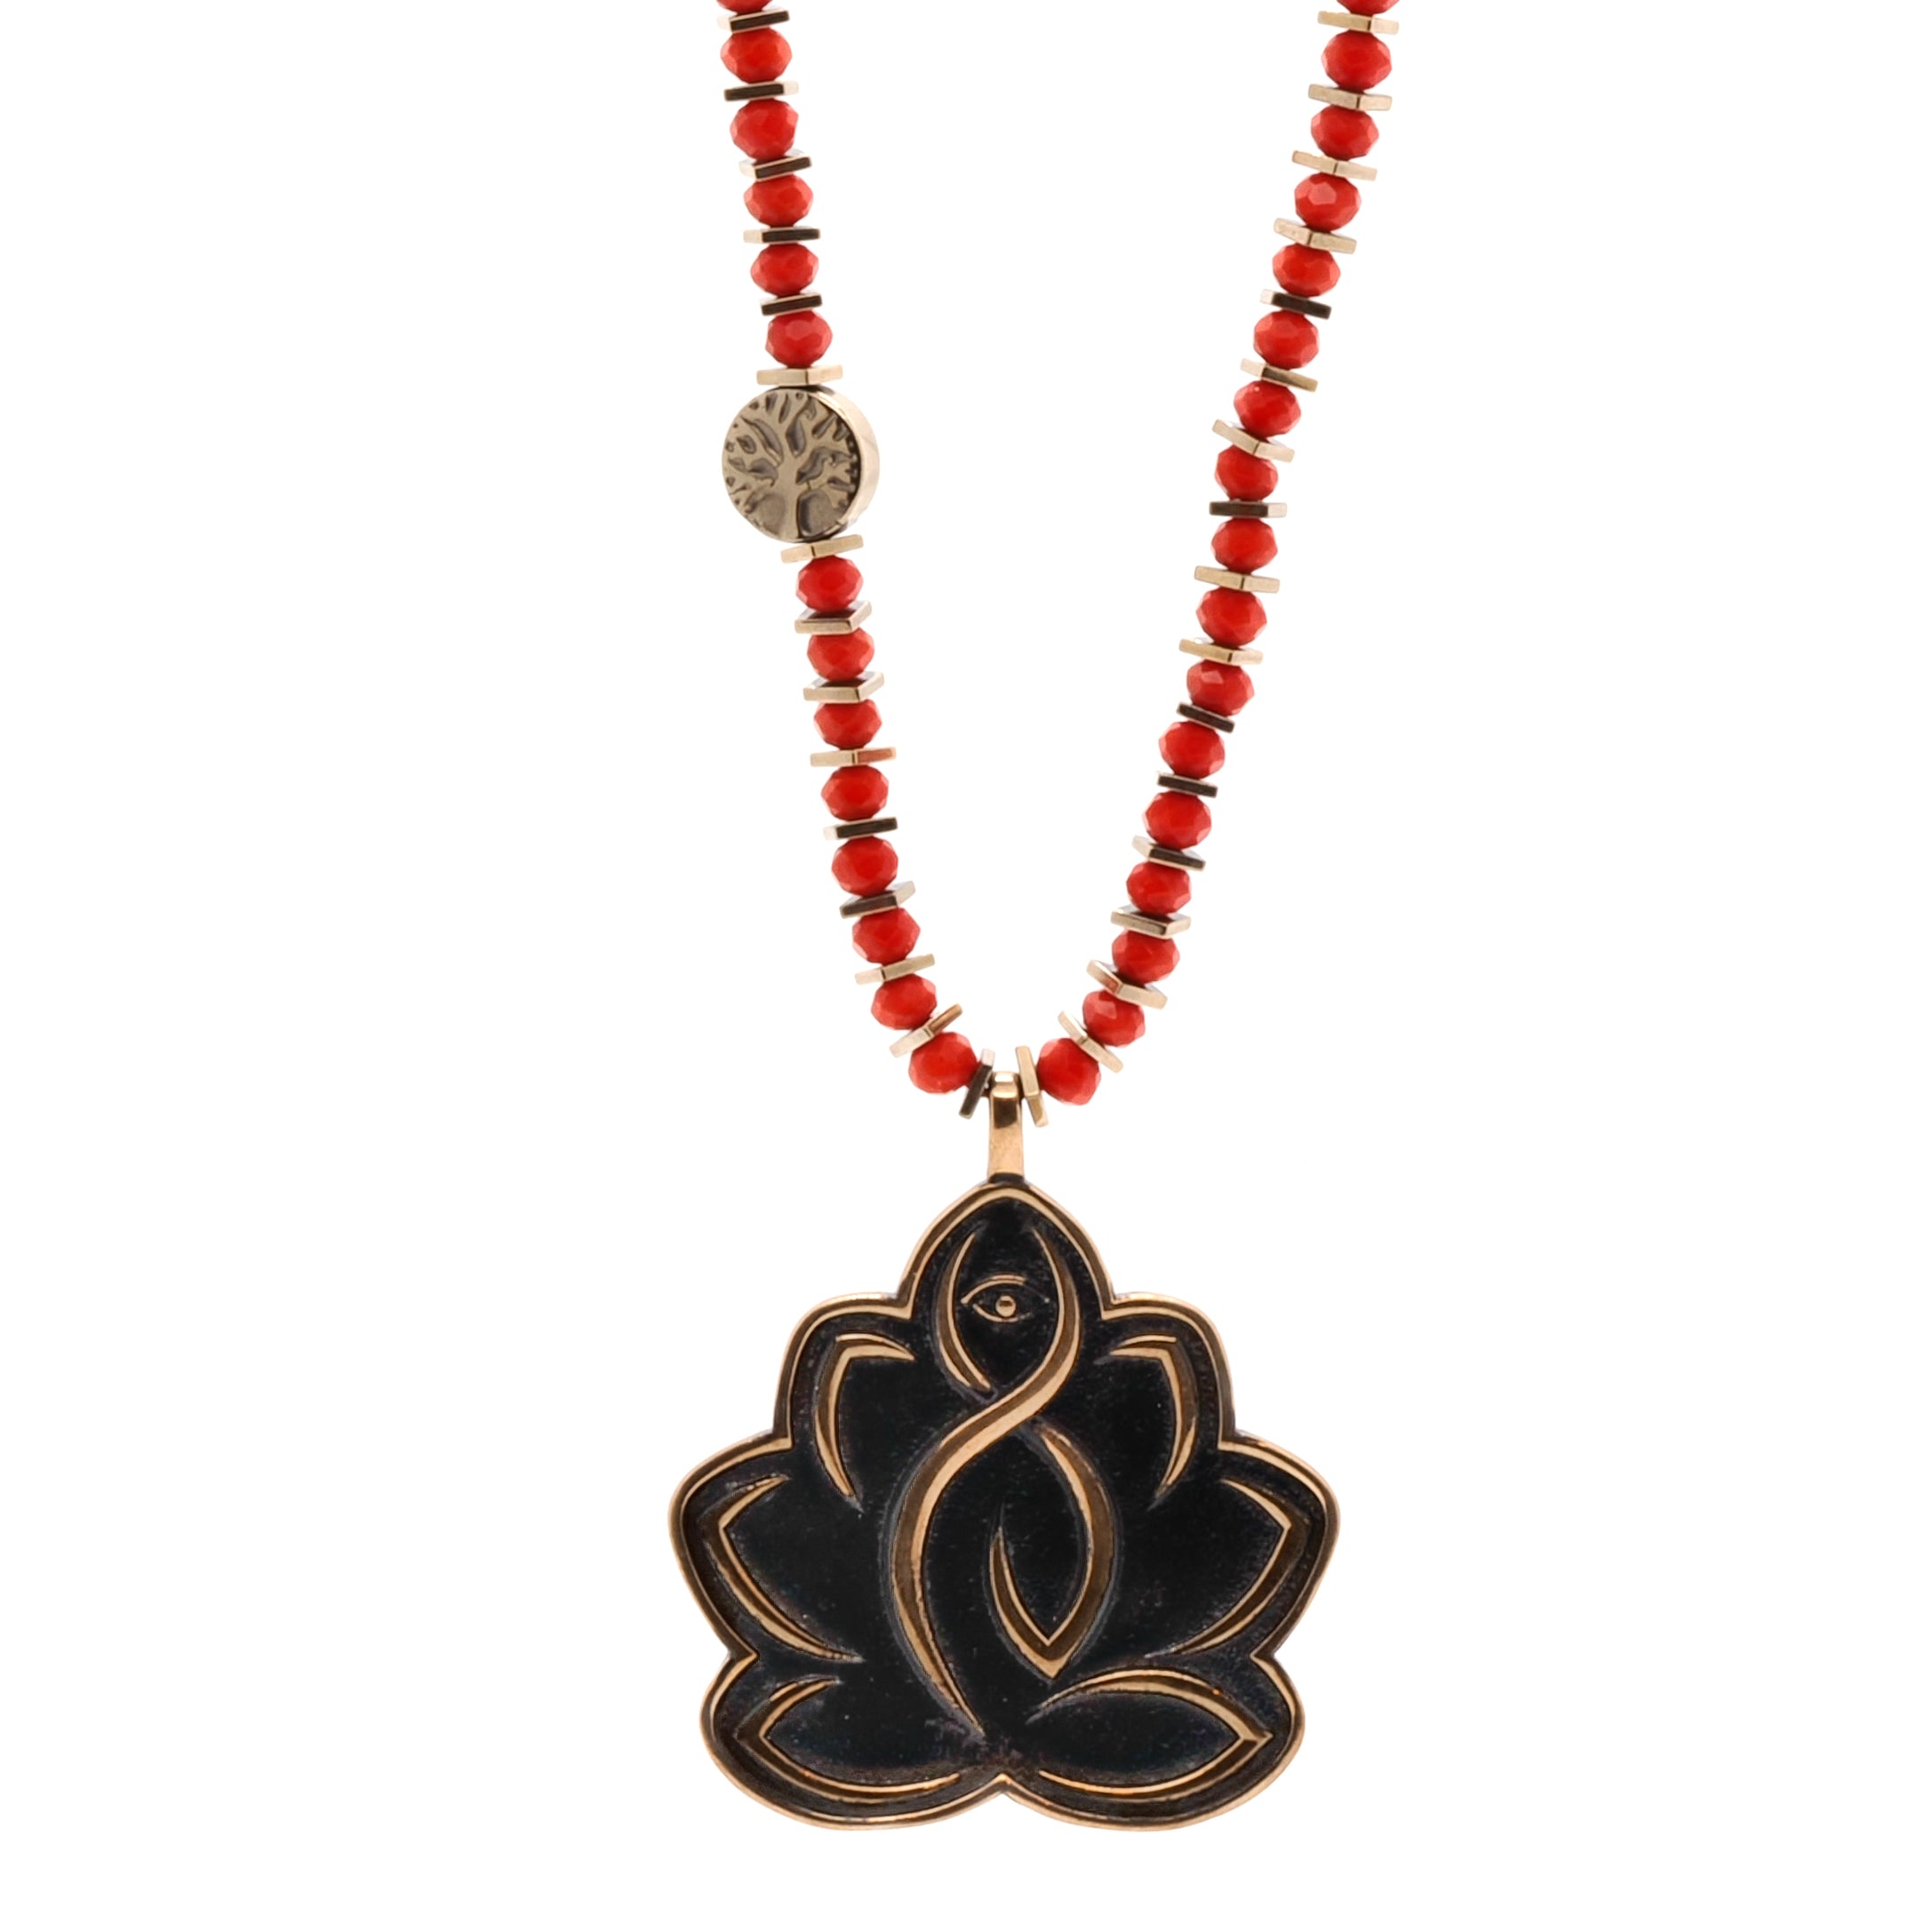 Buddha&#39;s Wisdom Necklace featuring a lotus pendant and powerful words of wisdom